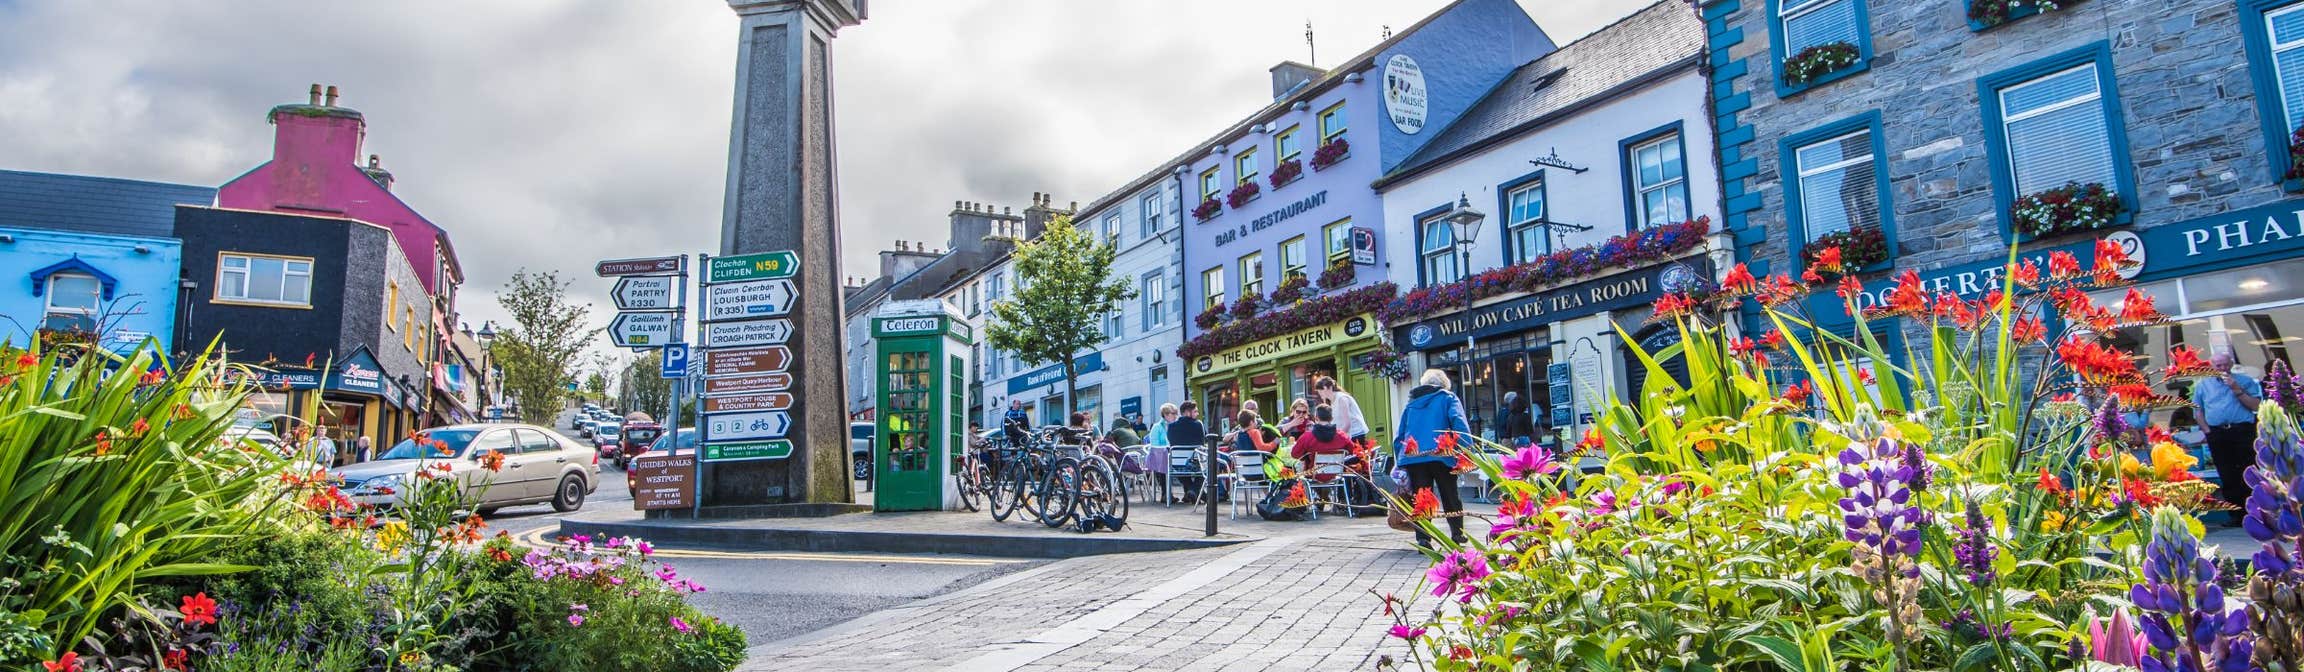 Image of Westport Town in County Mayo